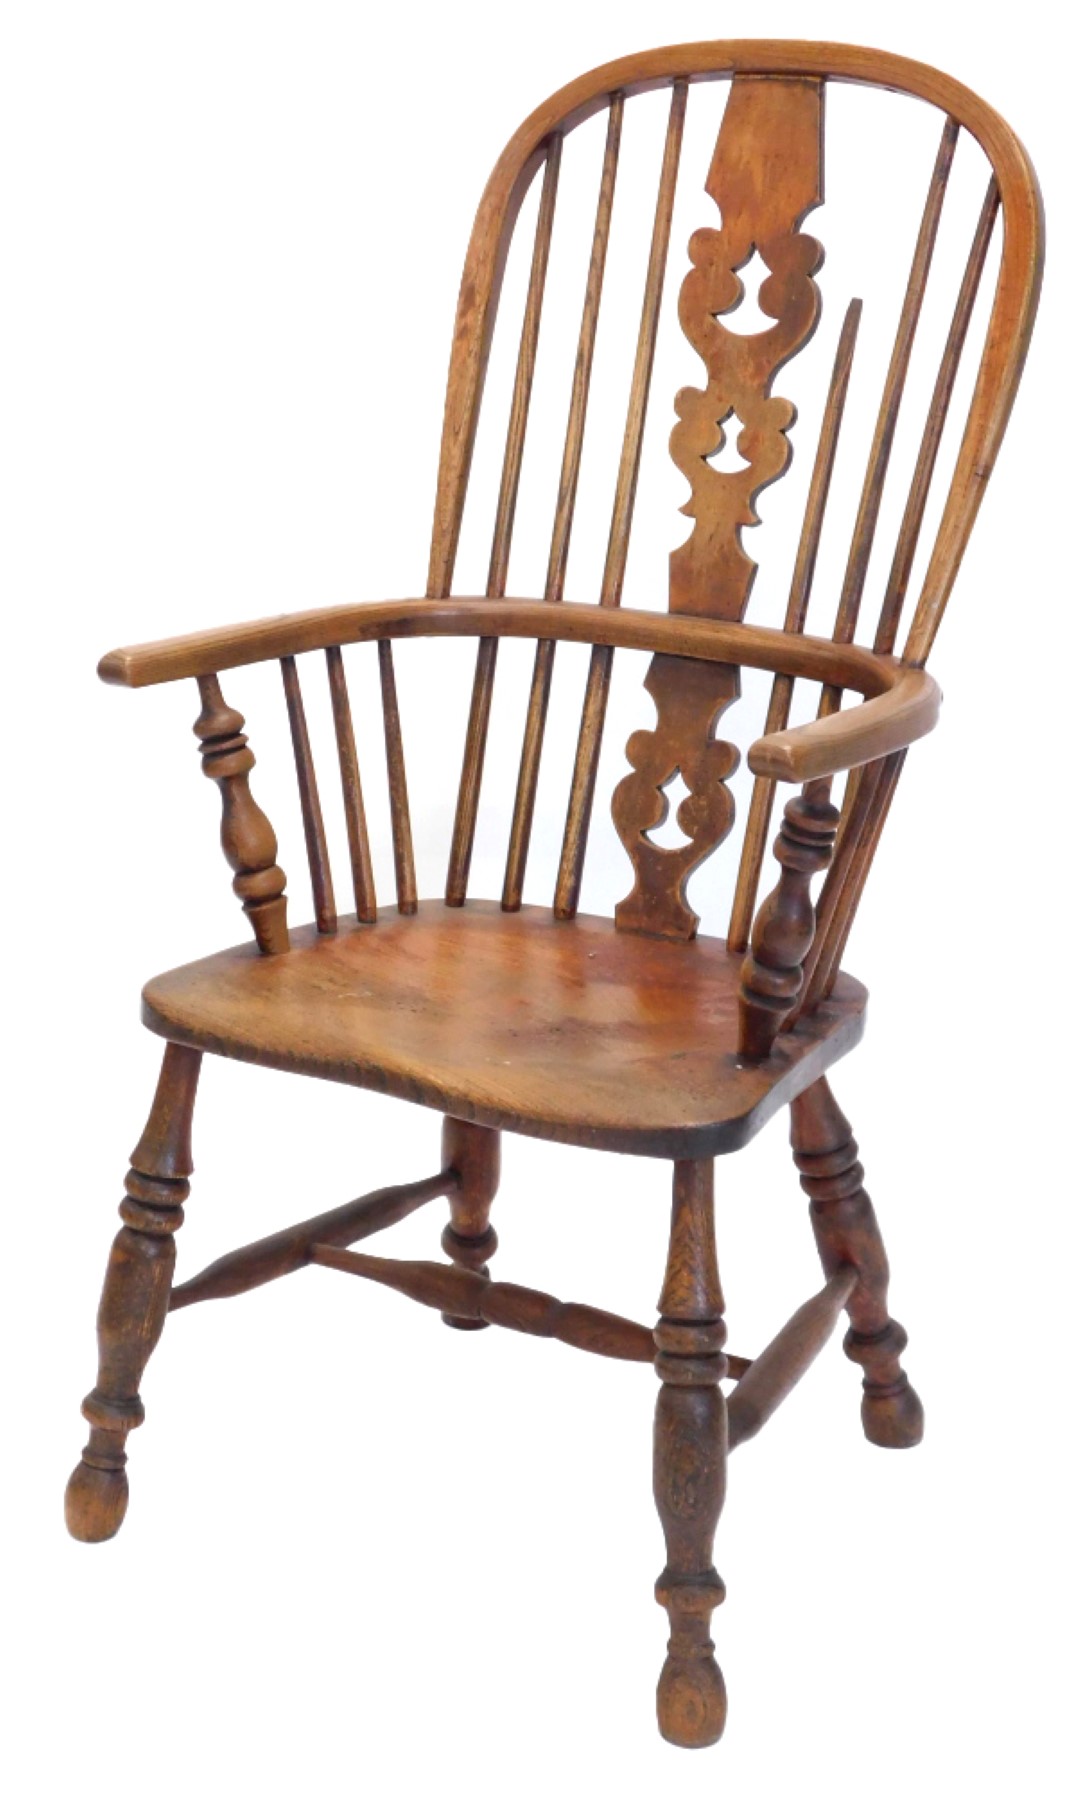 A late 19thC ash and elm Windsor chair with a pierced back splat, solid seat, on turned legs, with H